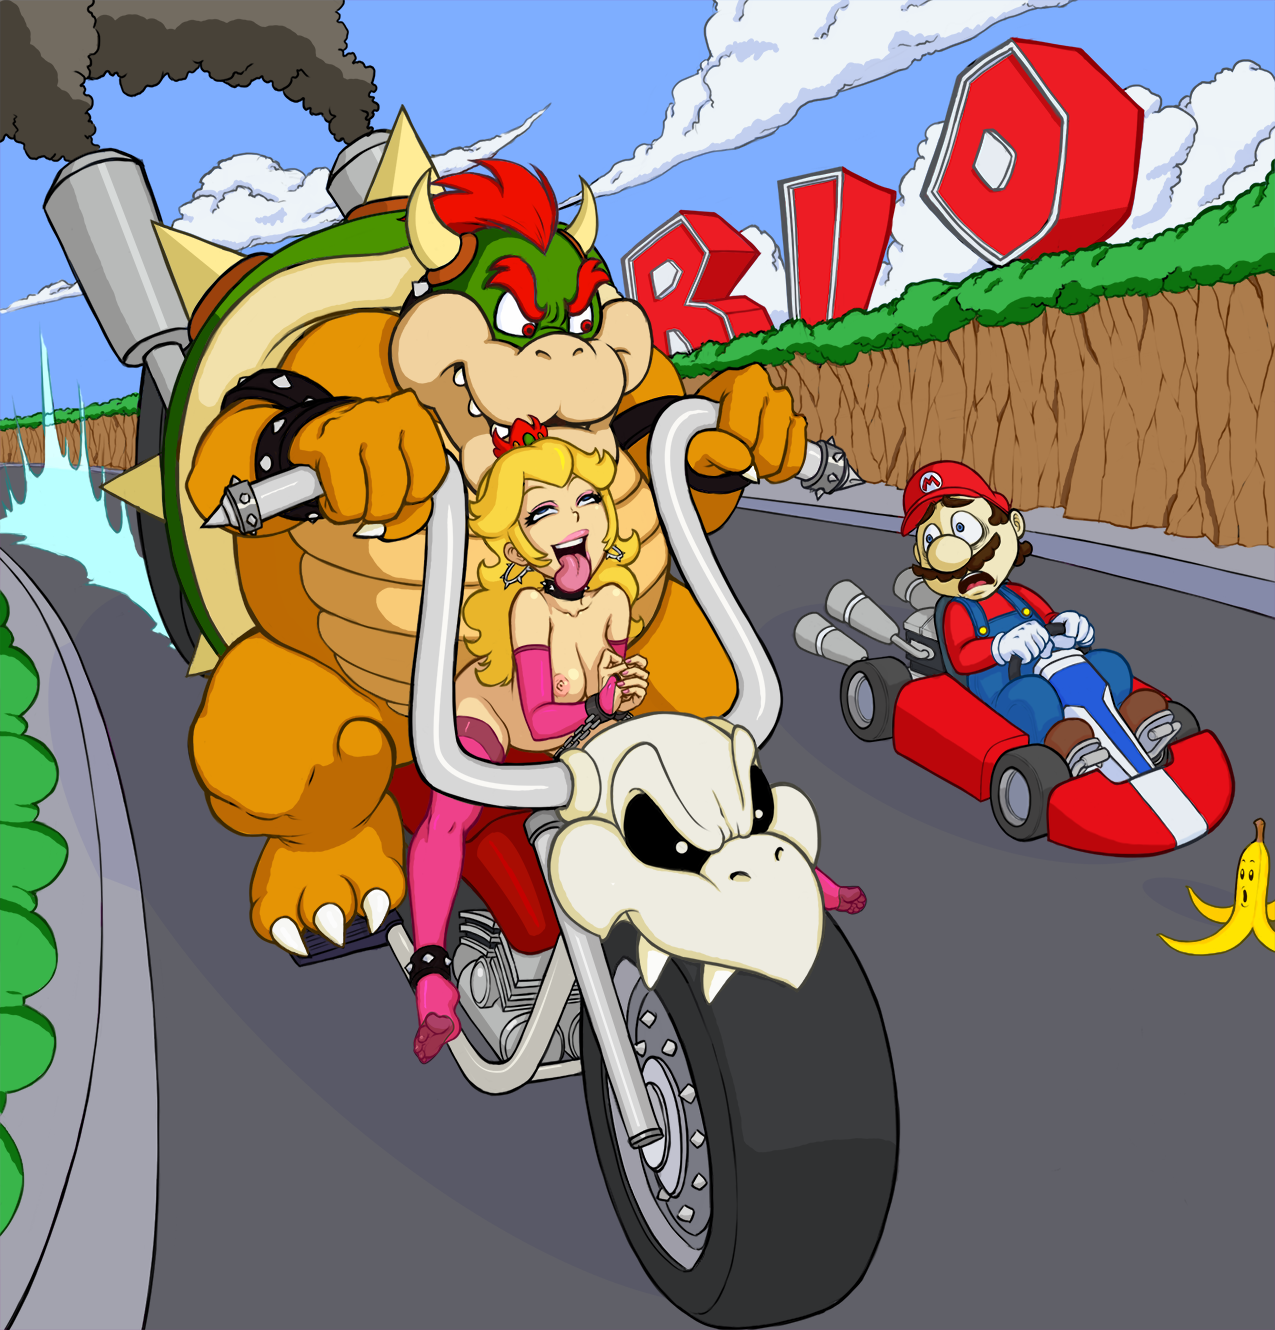 clare louise anderson recommends Rule 34 Mario Kart